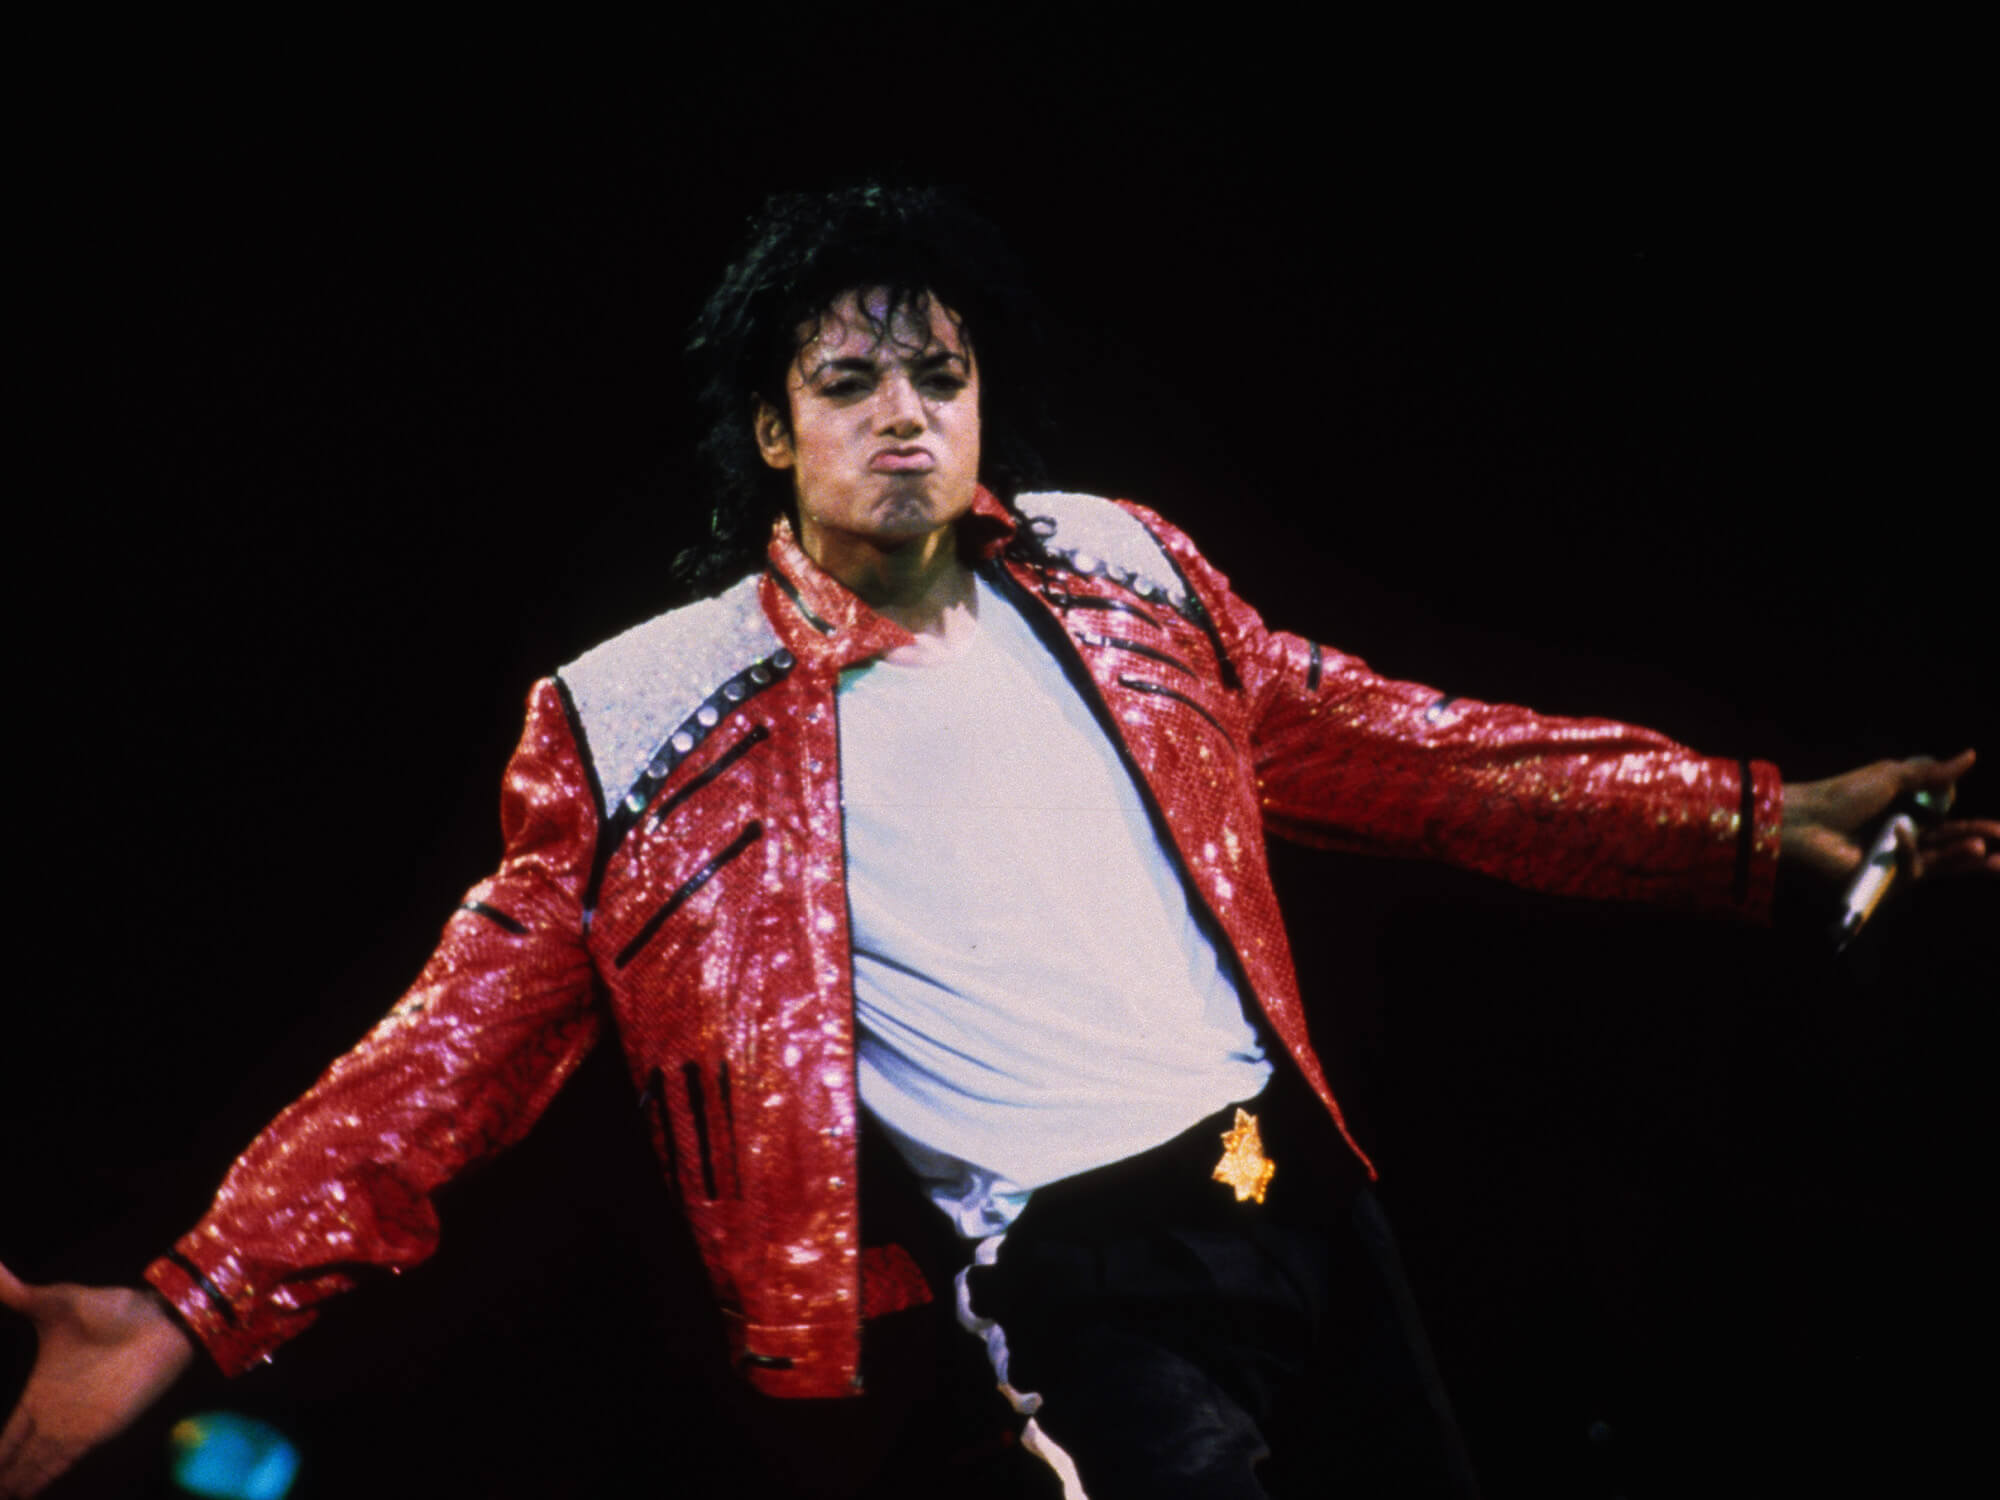 Michael Jackson on stage. He is wearing a bright leather jacket and has his arms out open to the side. He is pouting at the audience.